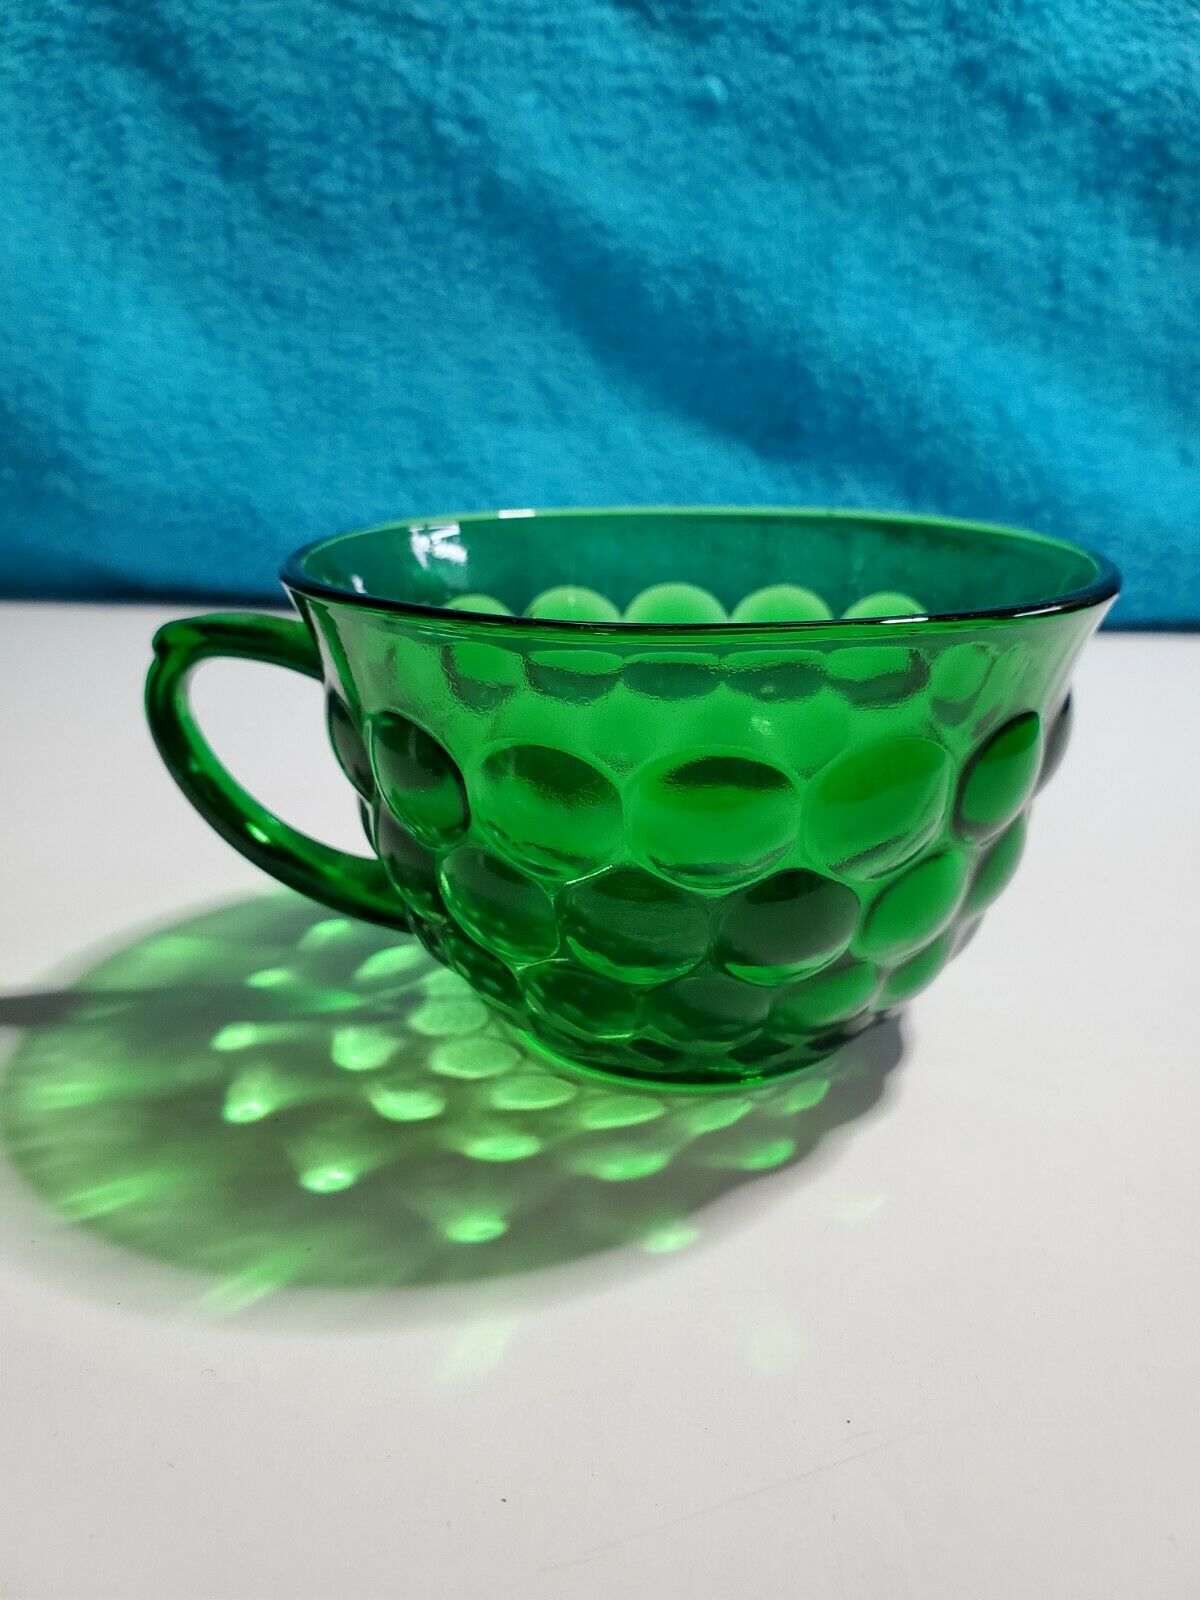 Ancchor Hocking Green Bubble Glass Cup